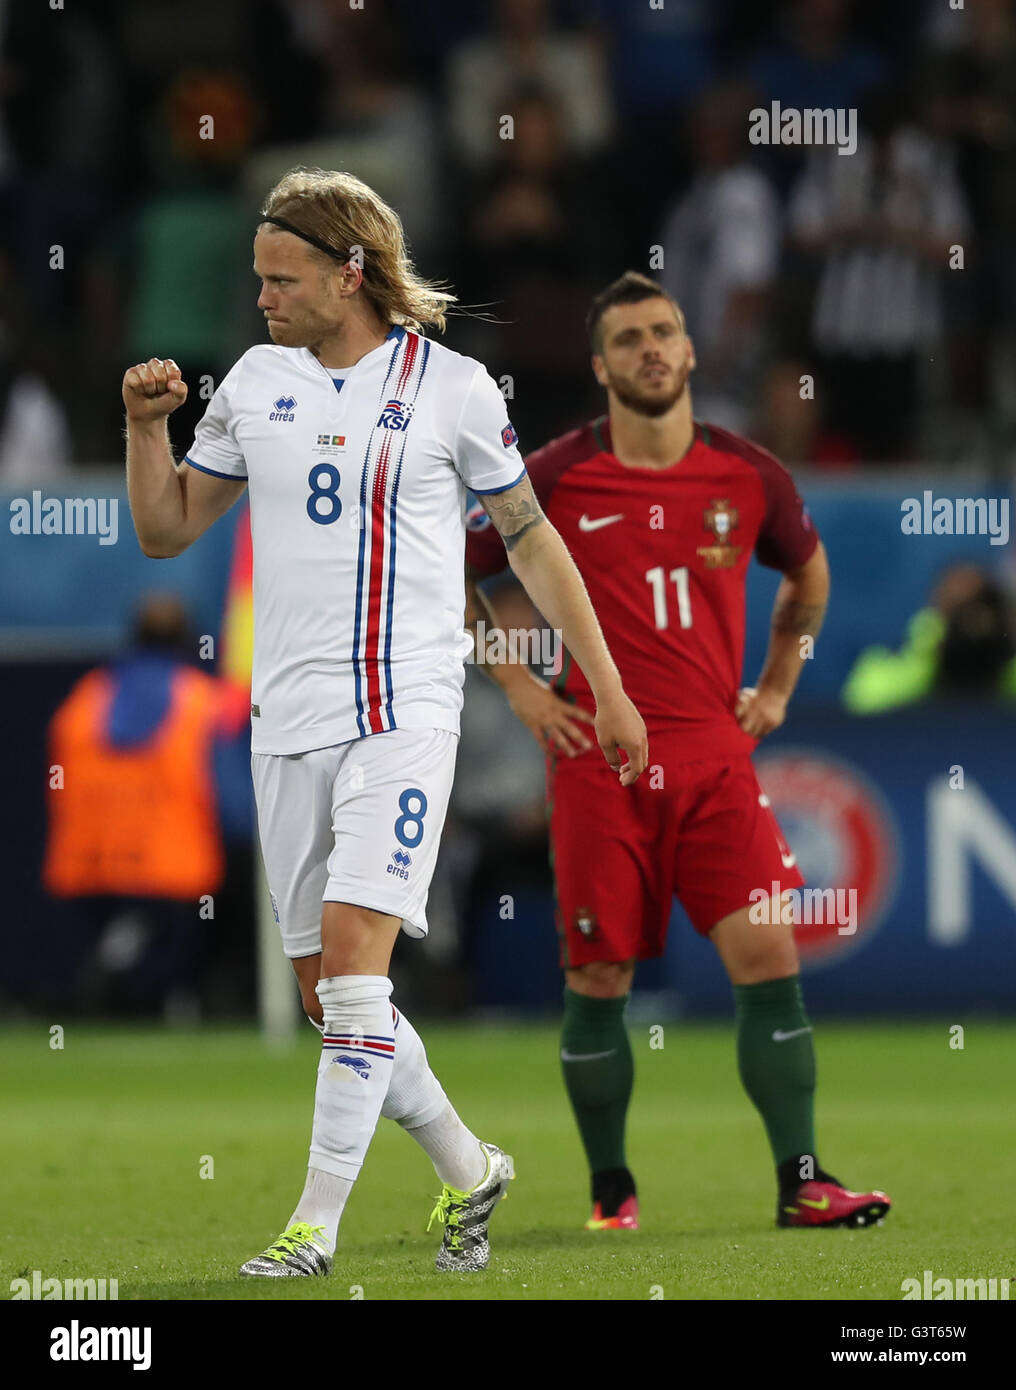 Saint Etienne, France. 14th June, 2016. Birkir Bjarnason (L) of Iceland celebrates after scoring during the Euro 2016 Group F soccer match between Portugal and Iceland in Saint-Etienne, France, June 14, 2016. Credit:  Xinhua/Alamy Live News Stock Photo